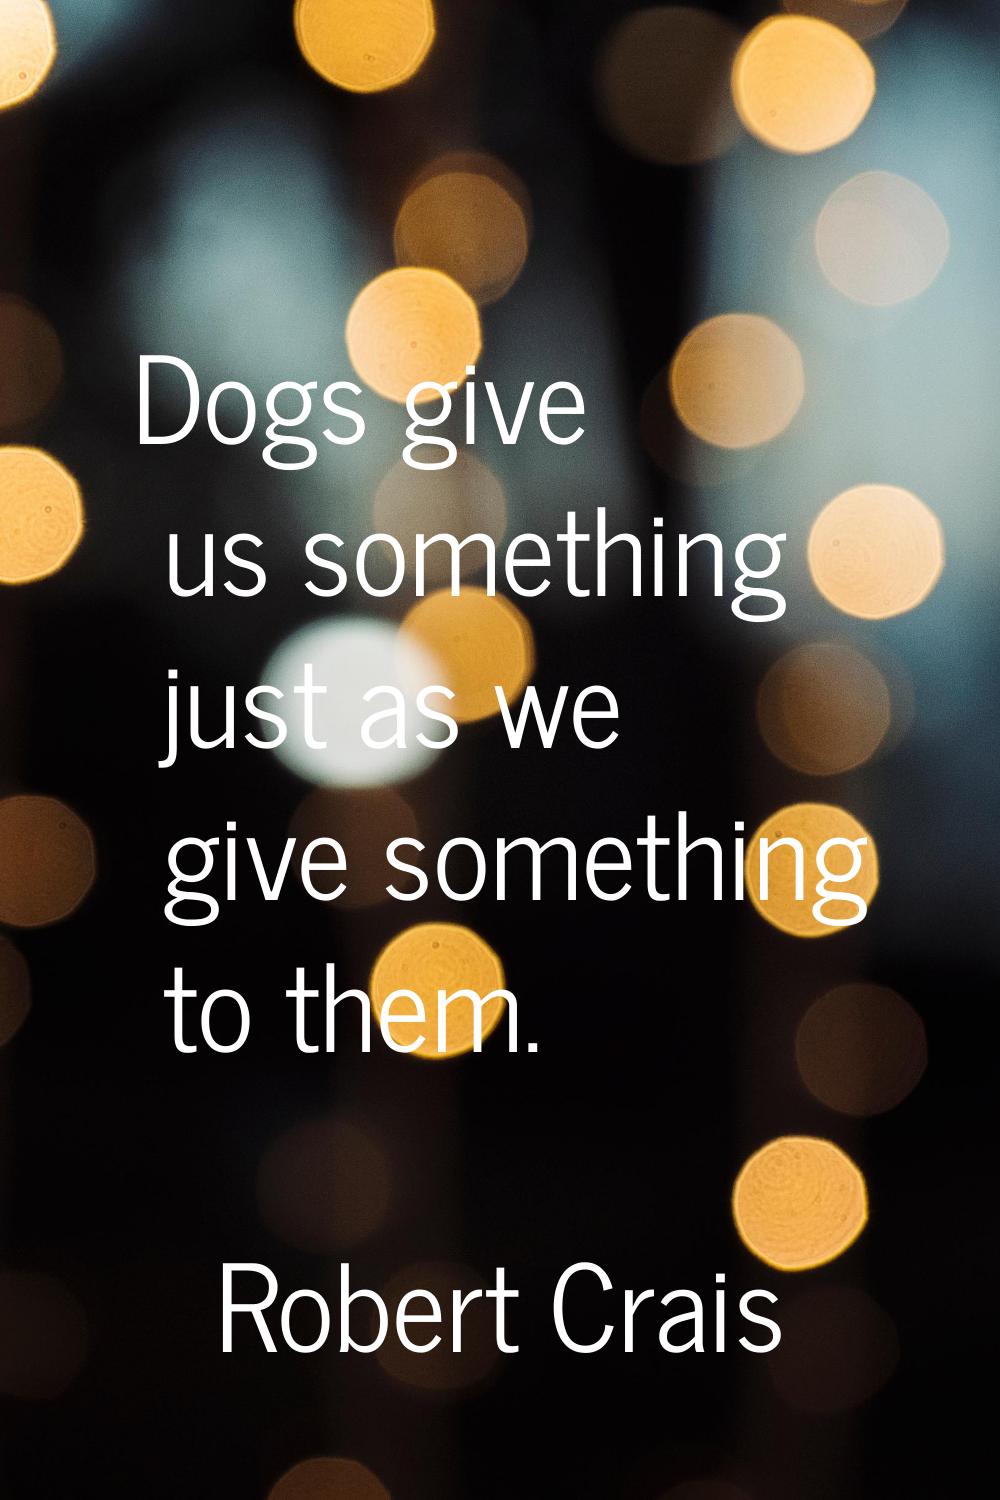 Dogs give us something just as we give something to them.